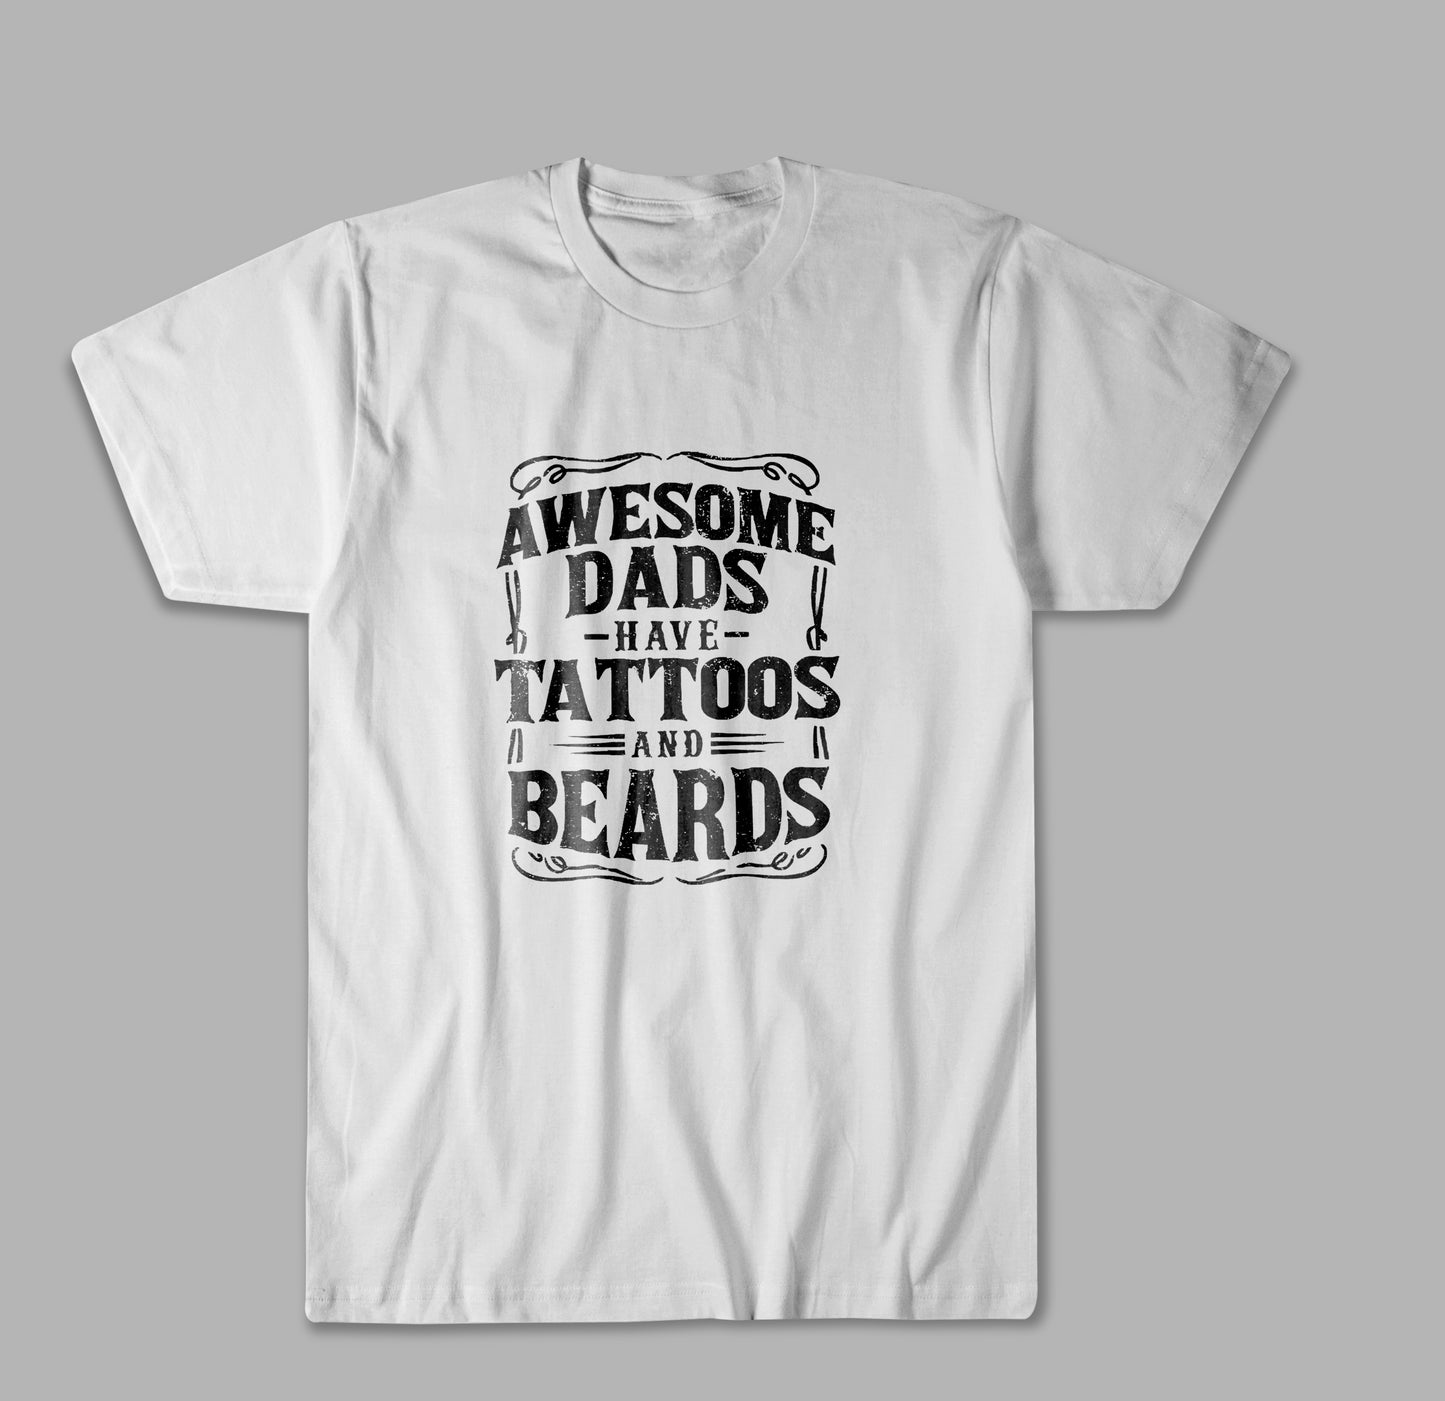 Awesome Dads Have Tattoos and Beards for Fathers Day T Shirt PJ6